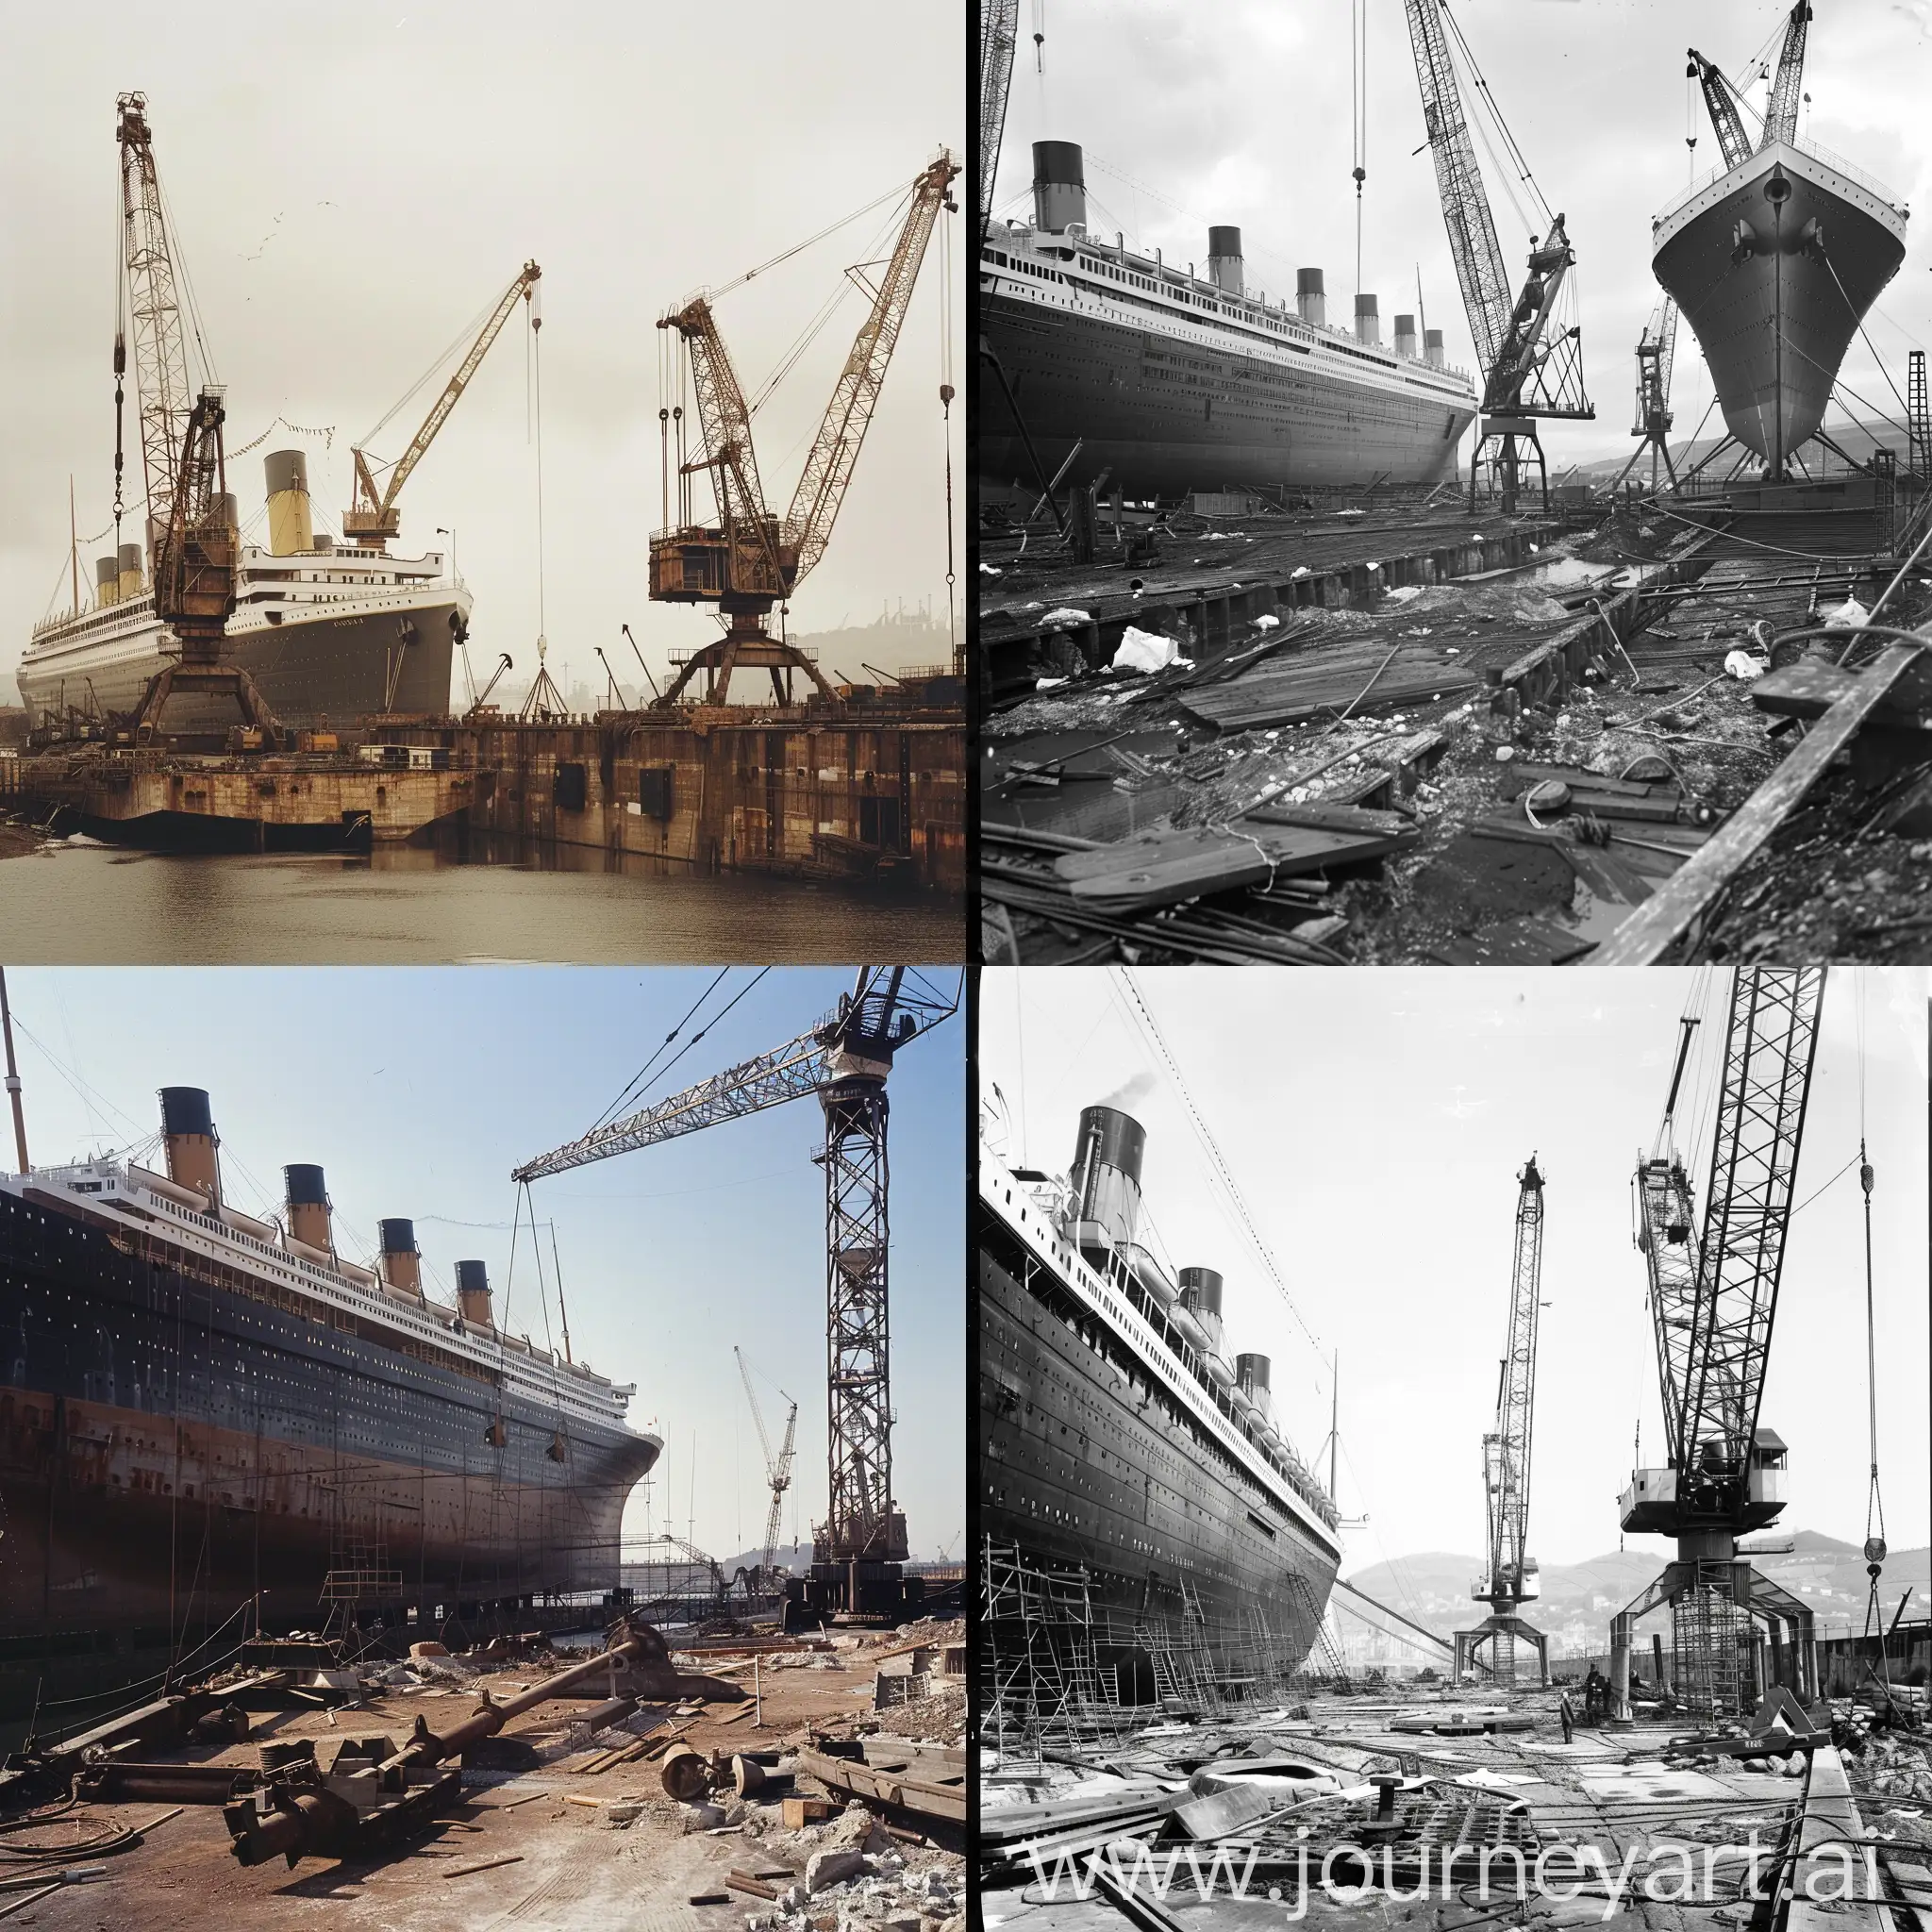 Replica-of-RMS-Titanic-Under-Construction-at-Shipyard-with-Cranes